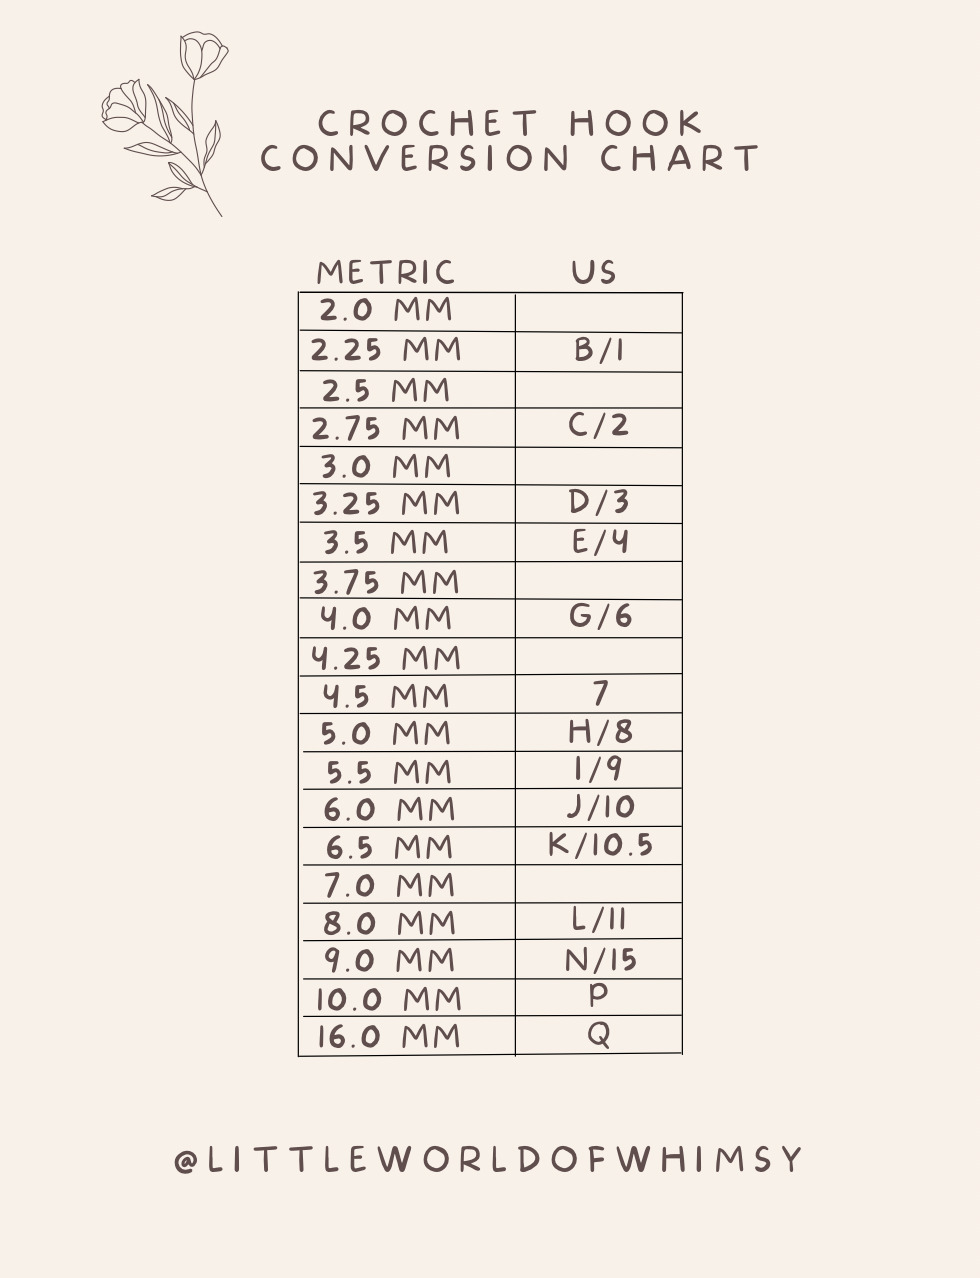 The Ultimate Crochet Hook Conversion Chart (US, UK, Japan!) - Little World  of Whimsy